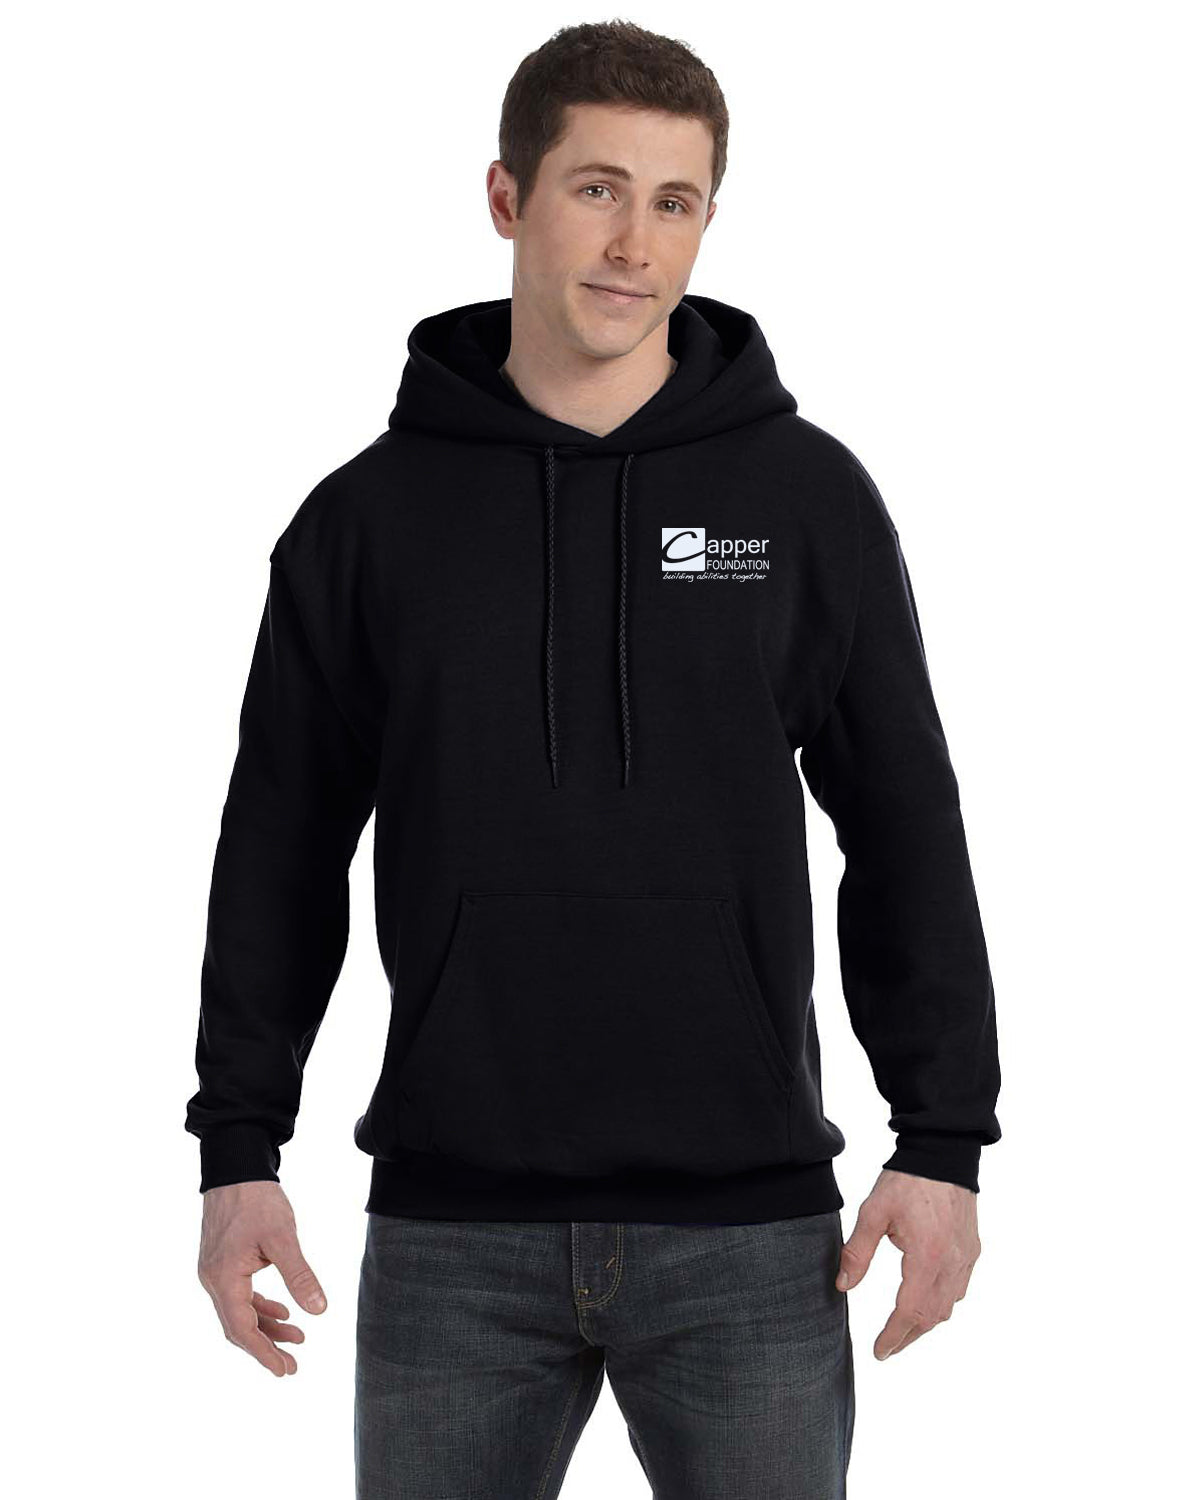 Capper Foundation CW - Adult 7.8 oz. 50/50 Pullover Hoodie - P170